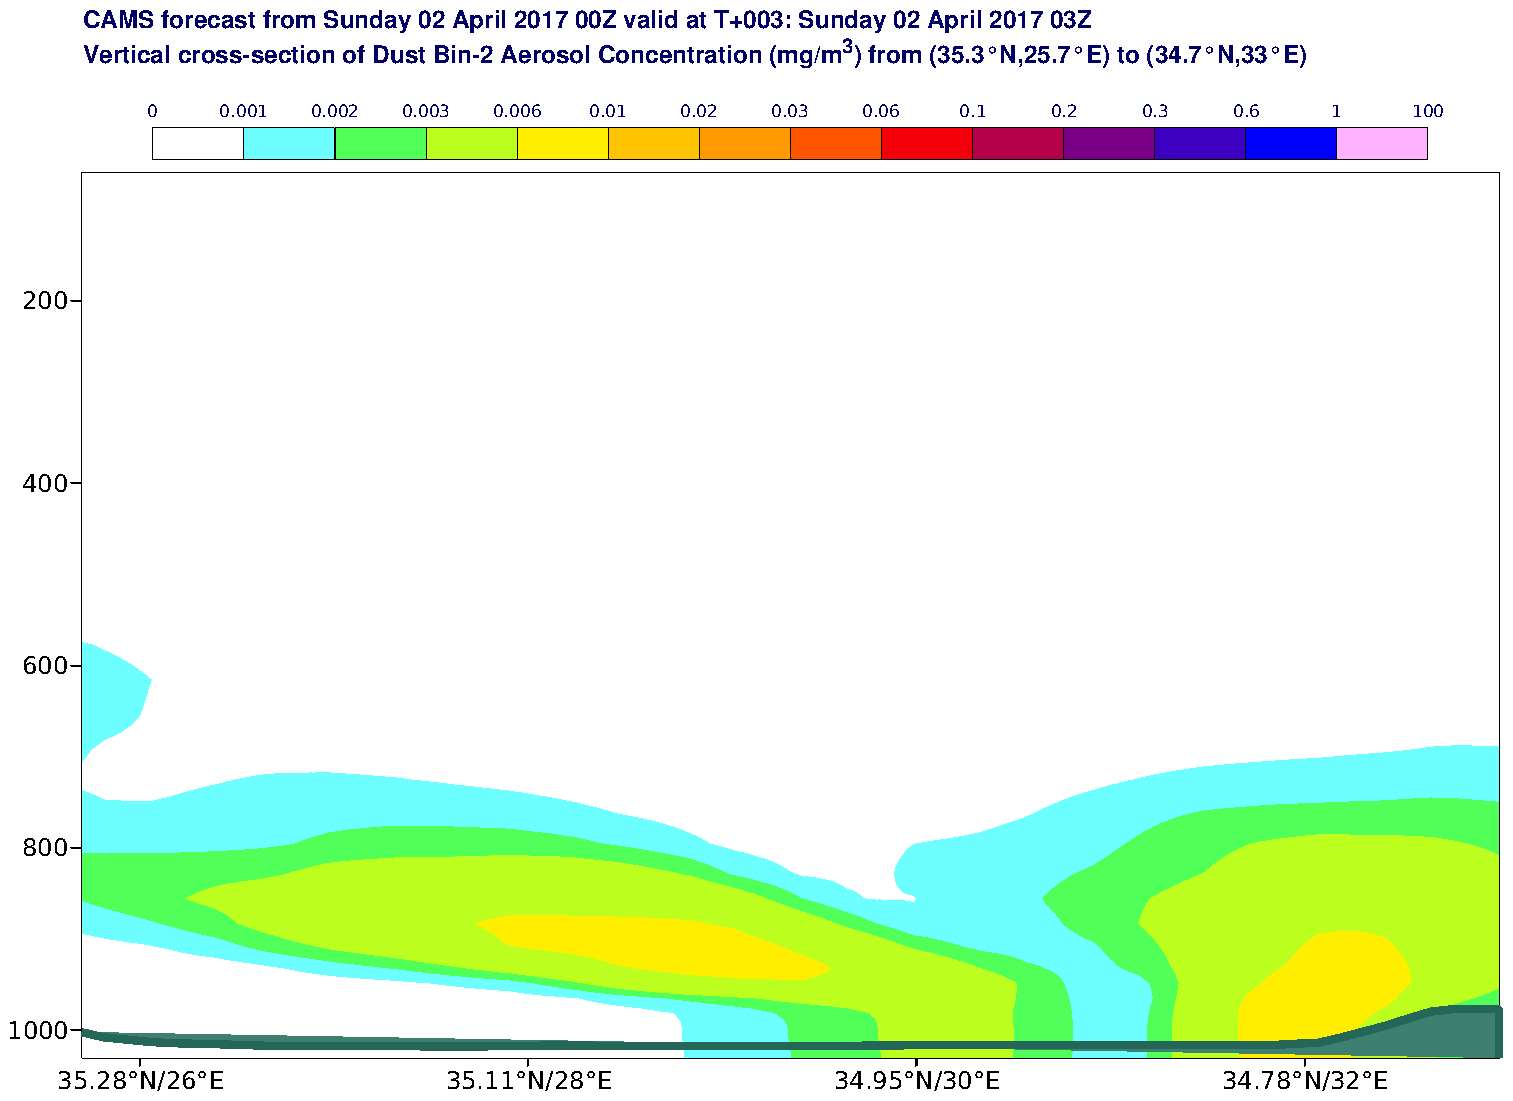 Vertical cross-section of Dust Bin-2 Aerosol Concentration (mg/m3) valid at T3 - 2017-04-02 03:00